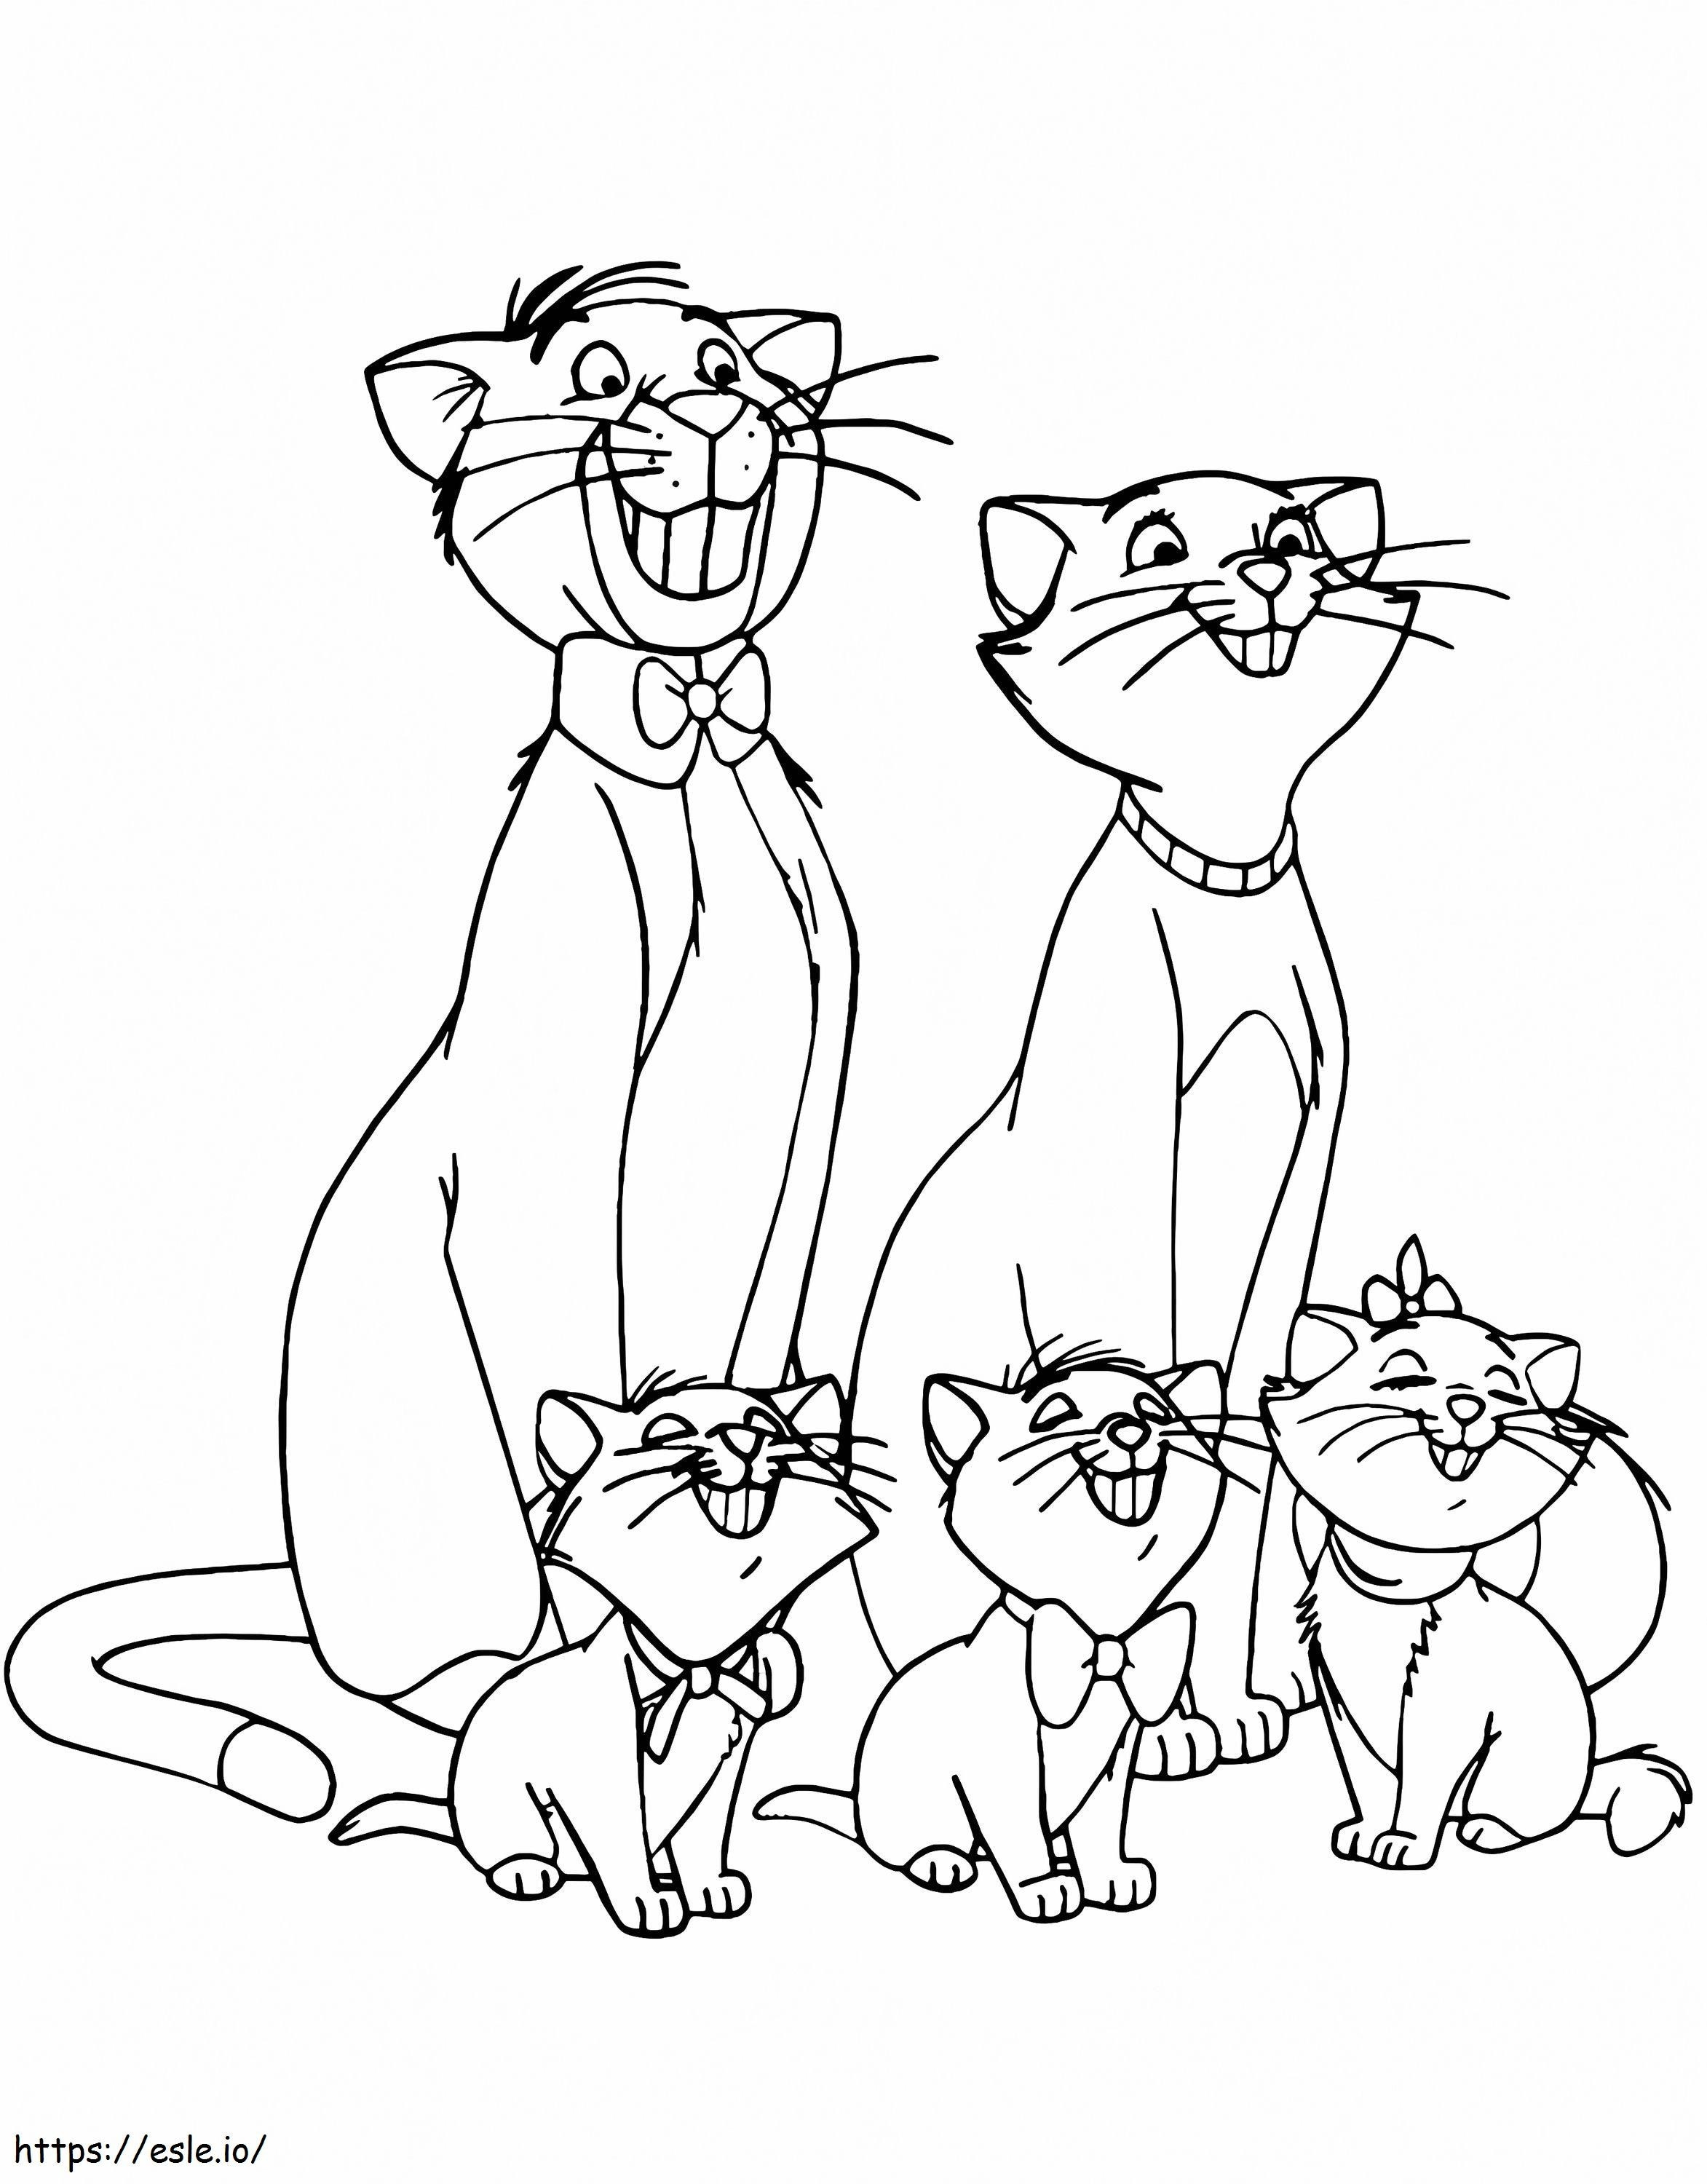 1599178084 Aristocats Coloring coloring page